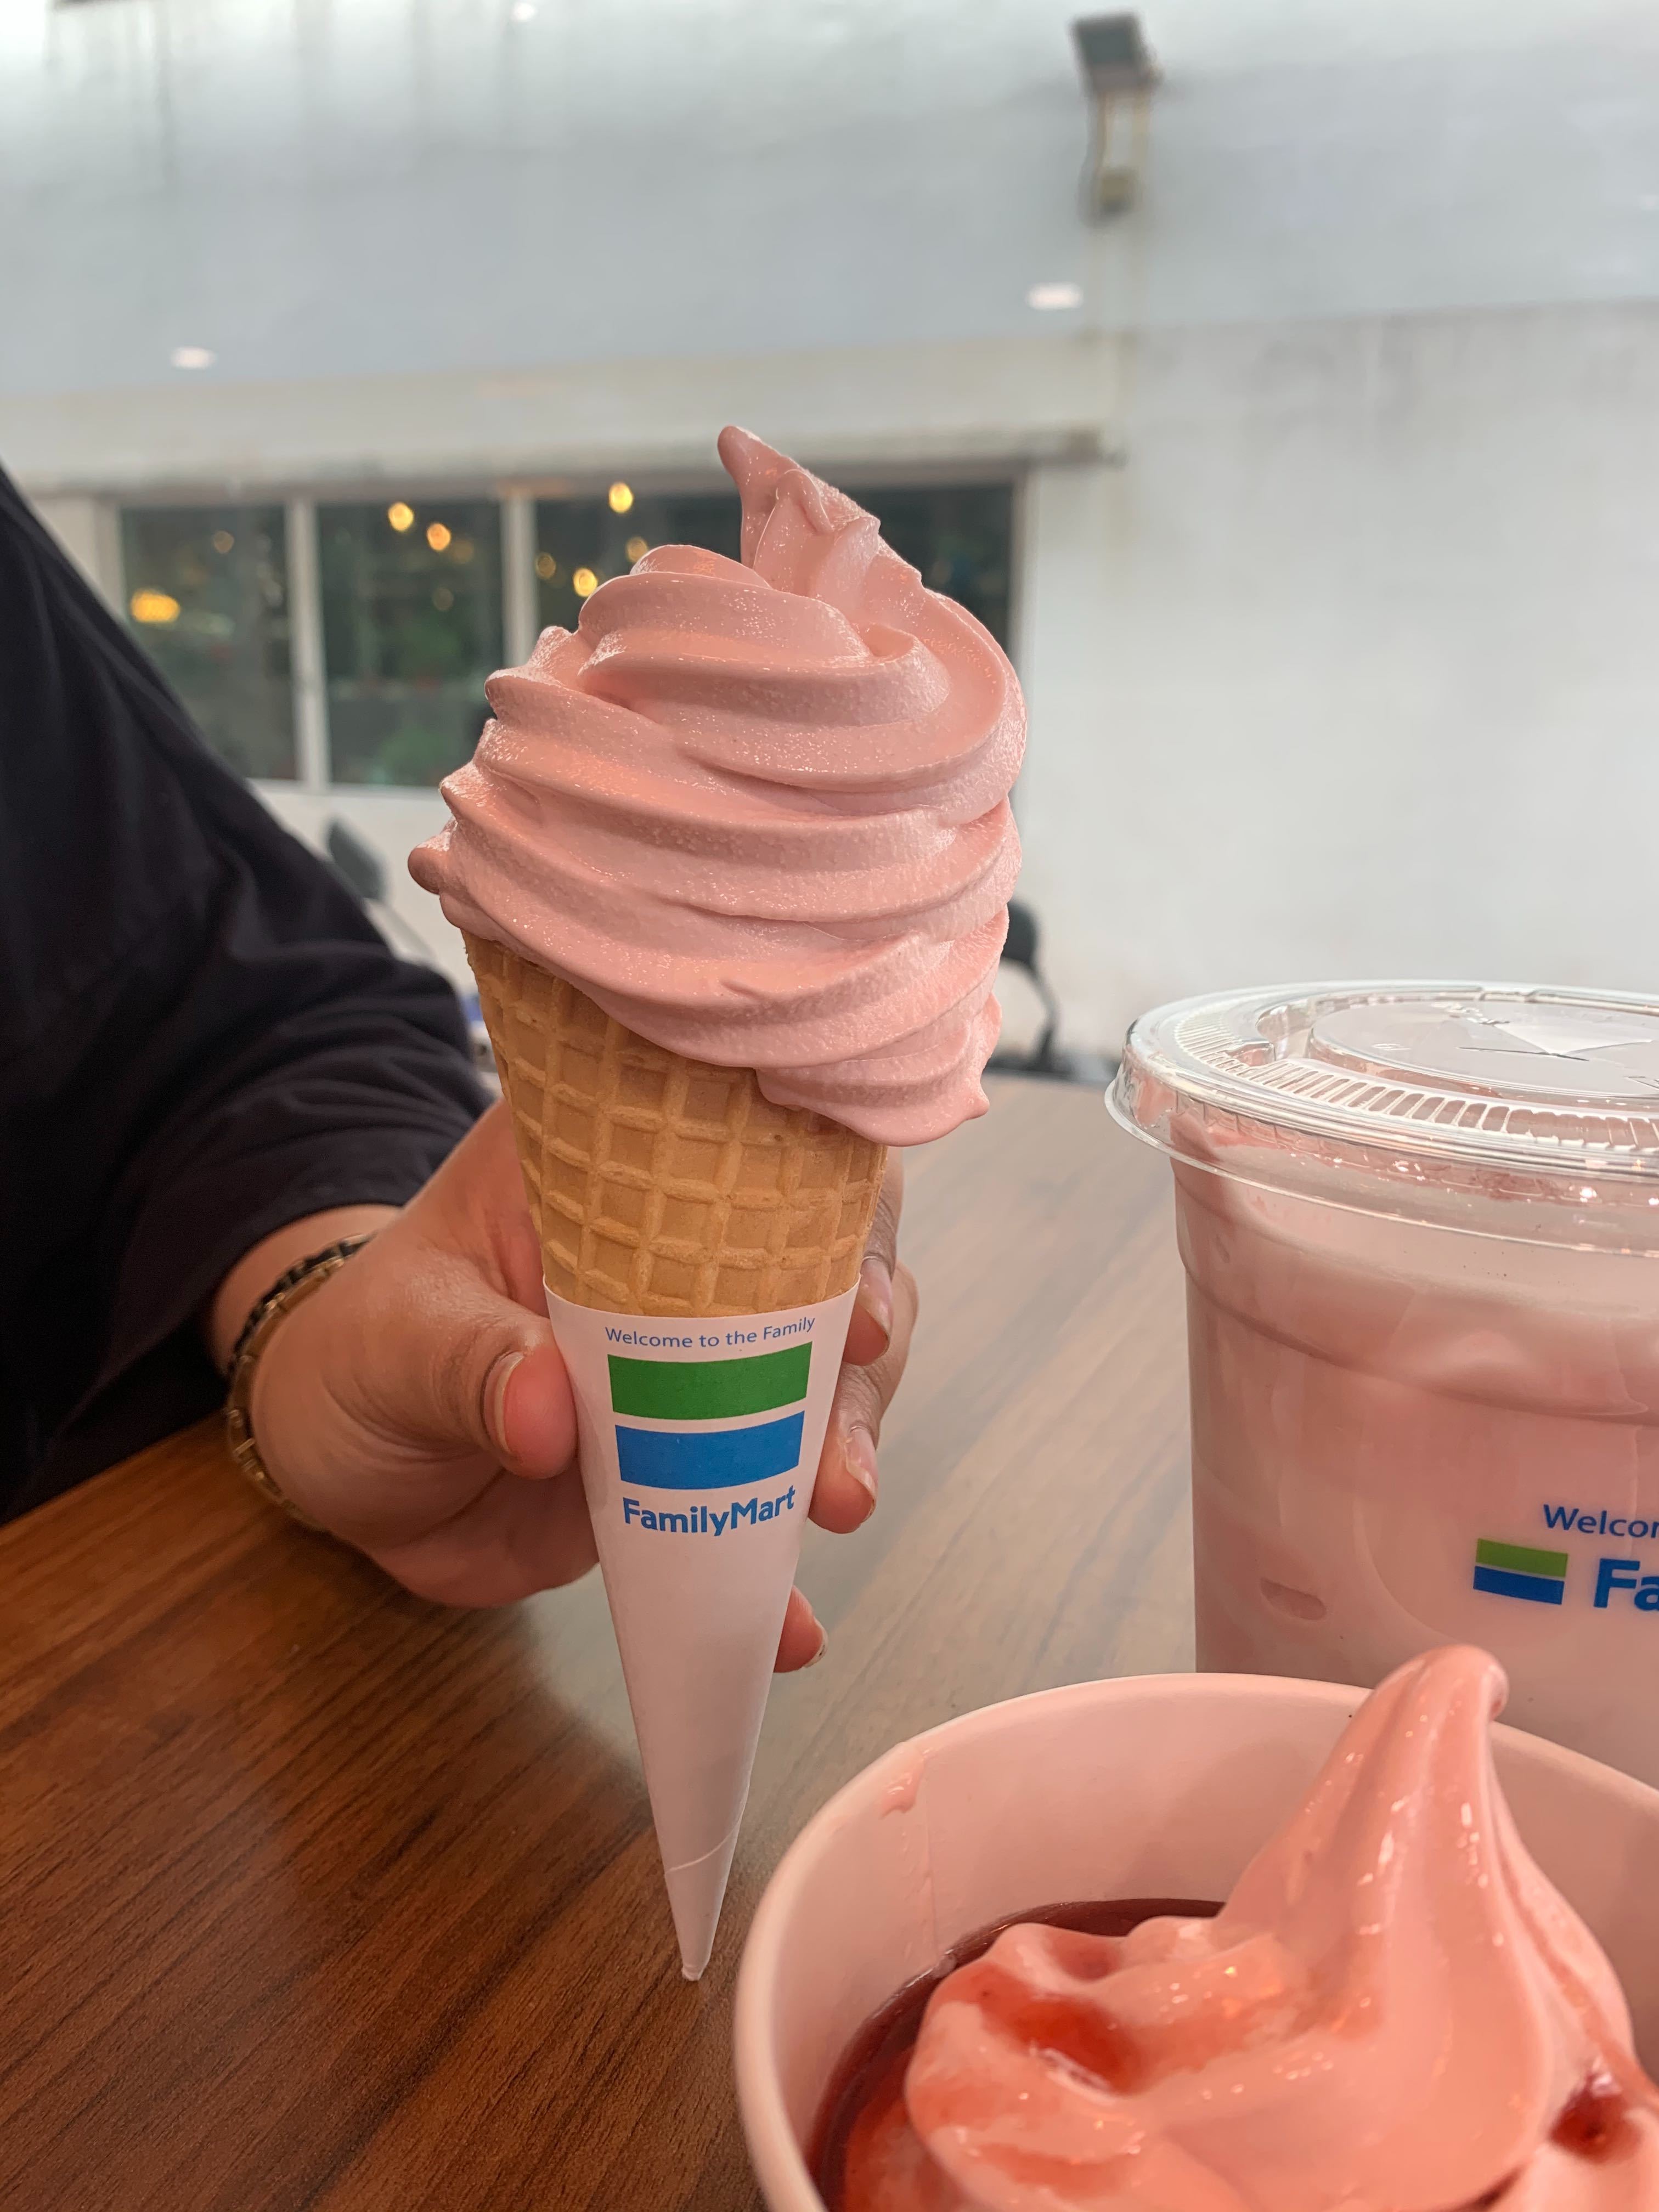 FamilyMart Rolled Out A New Soft Serve Flavour And January Babies Can